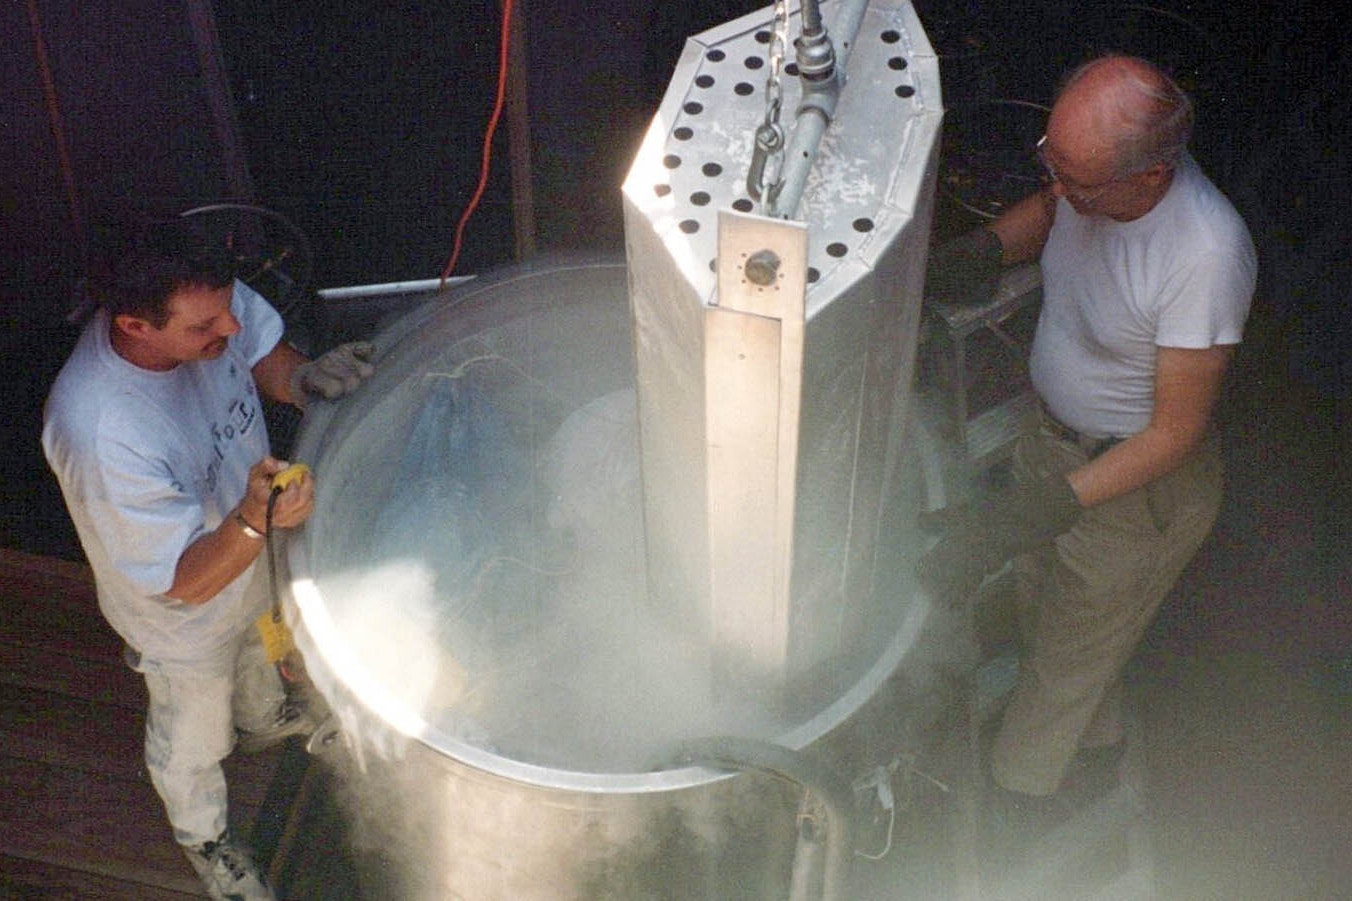 A pair of technicians lower a body into a cryonics vessel.